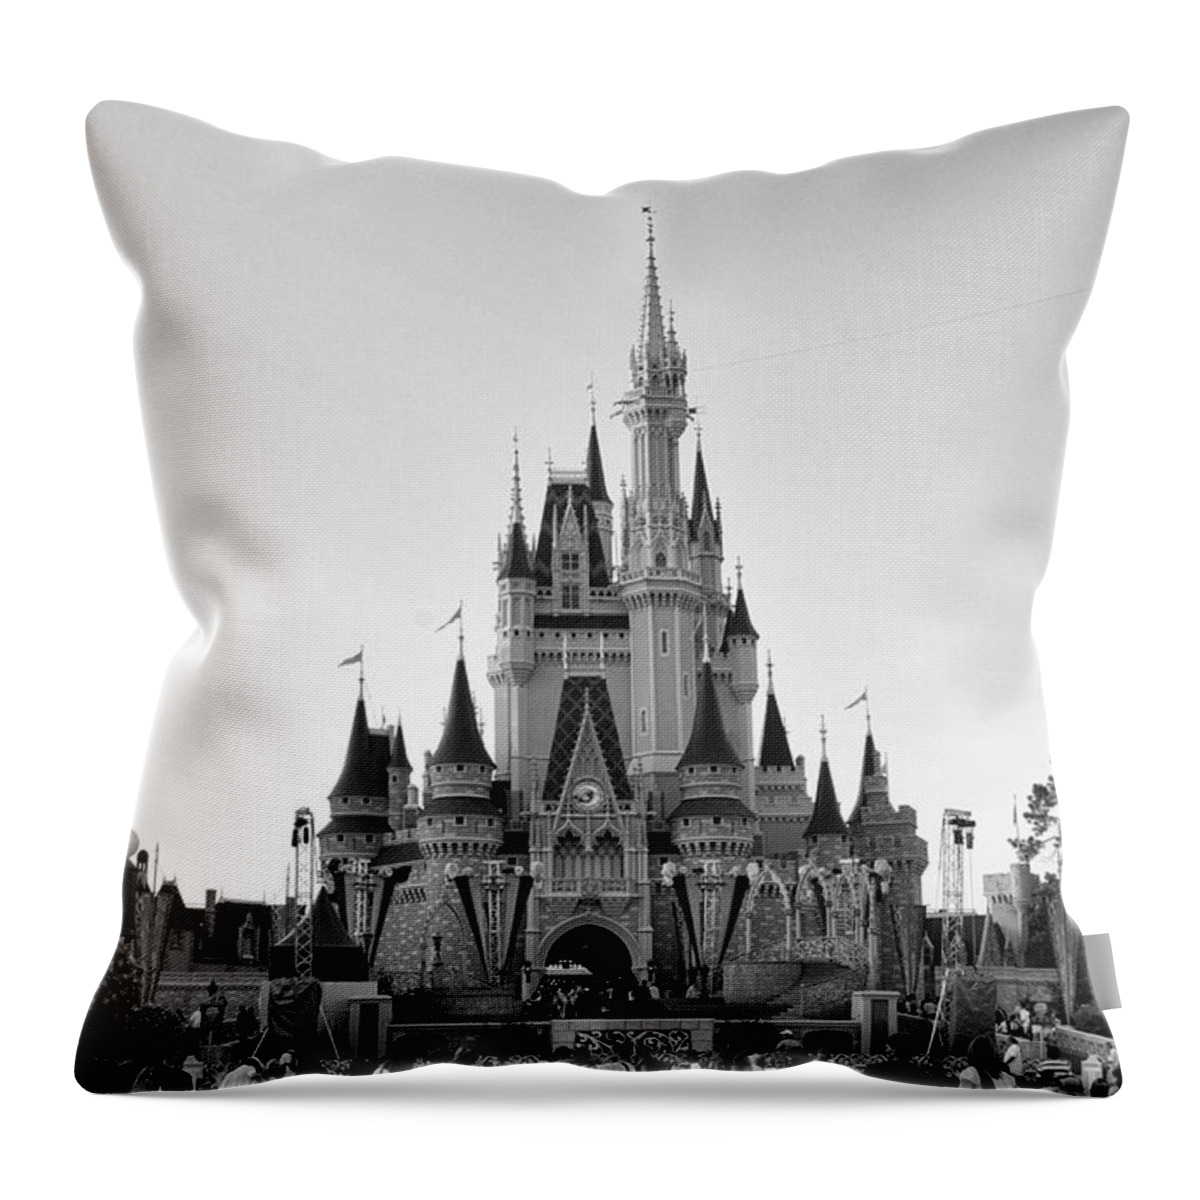 Castle Throw Pillow featuring the photograph Magic Kingdom Castle In Black And White by Thomas Woolworth